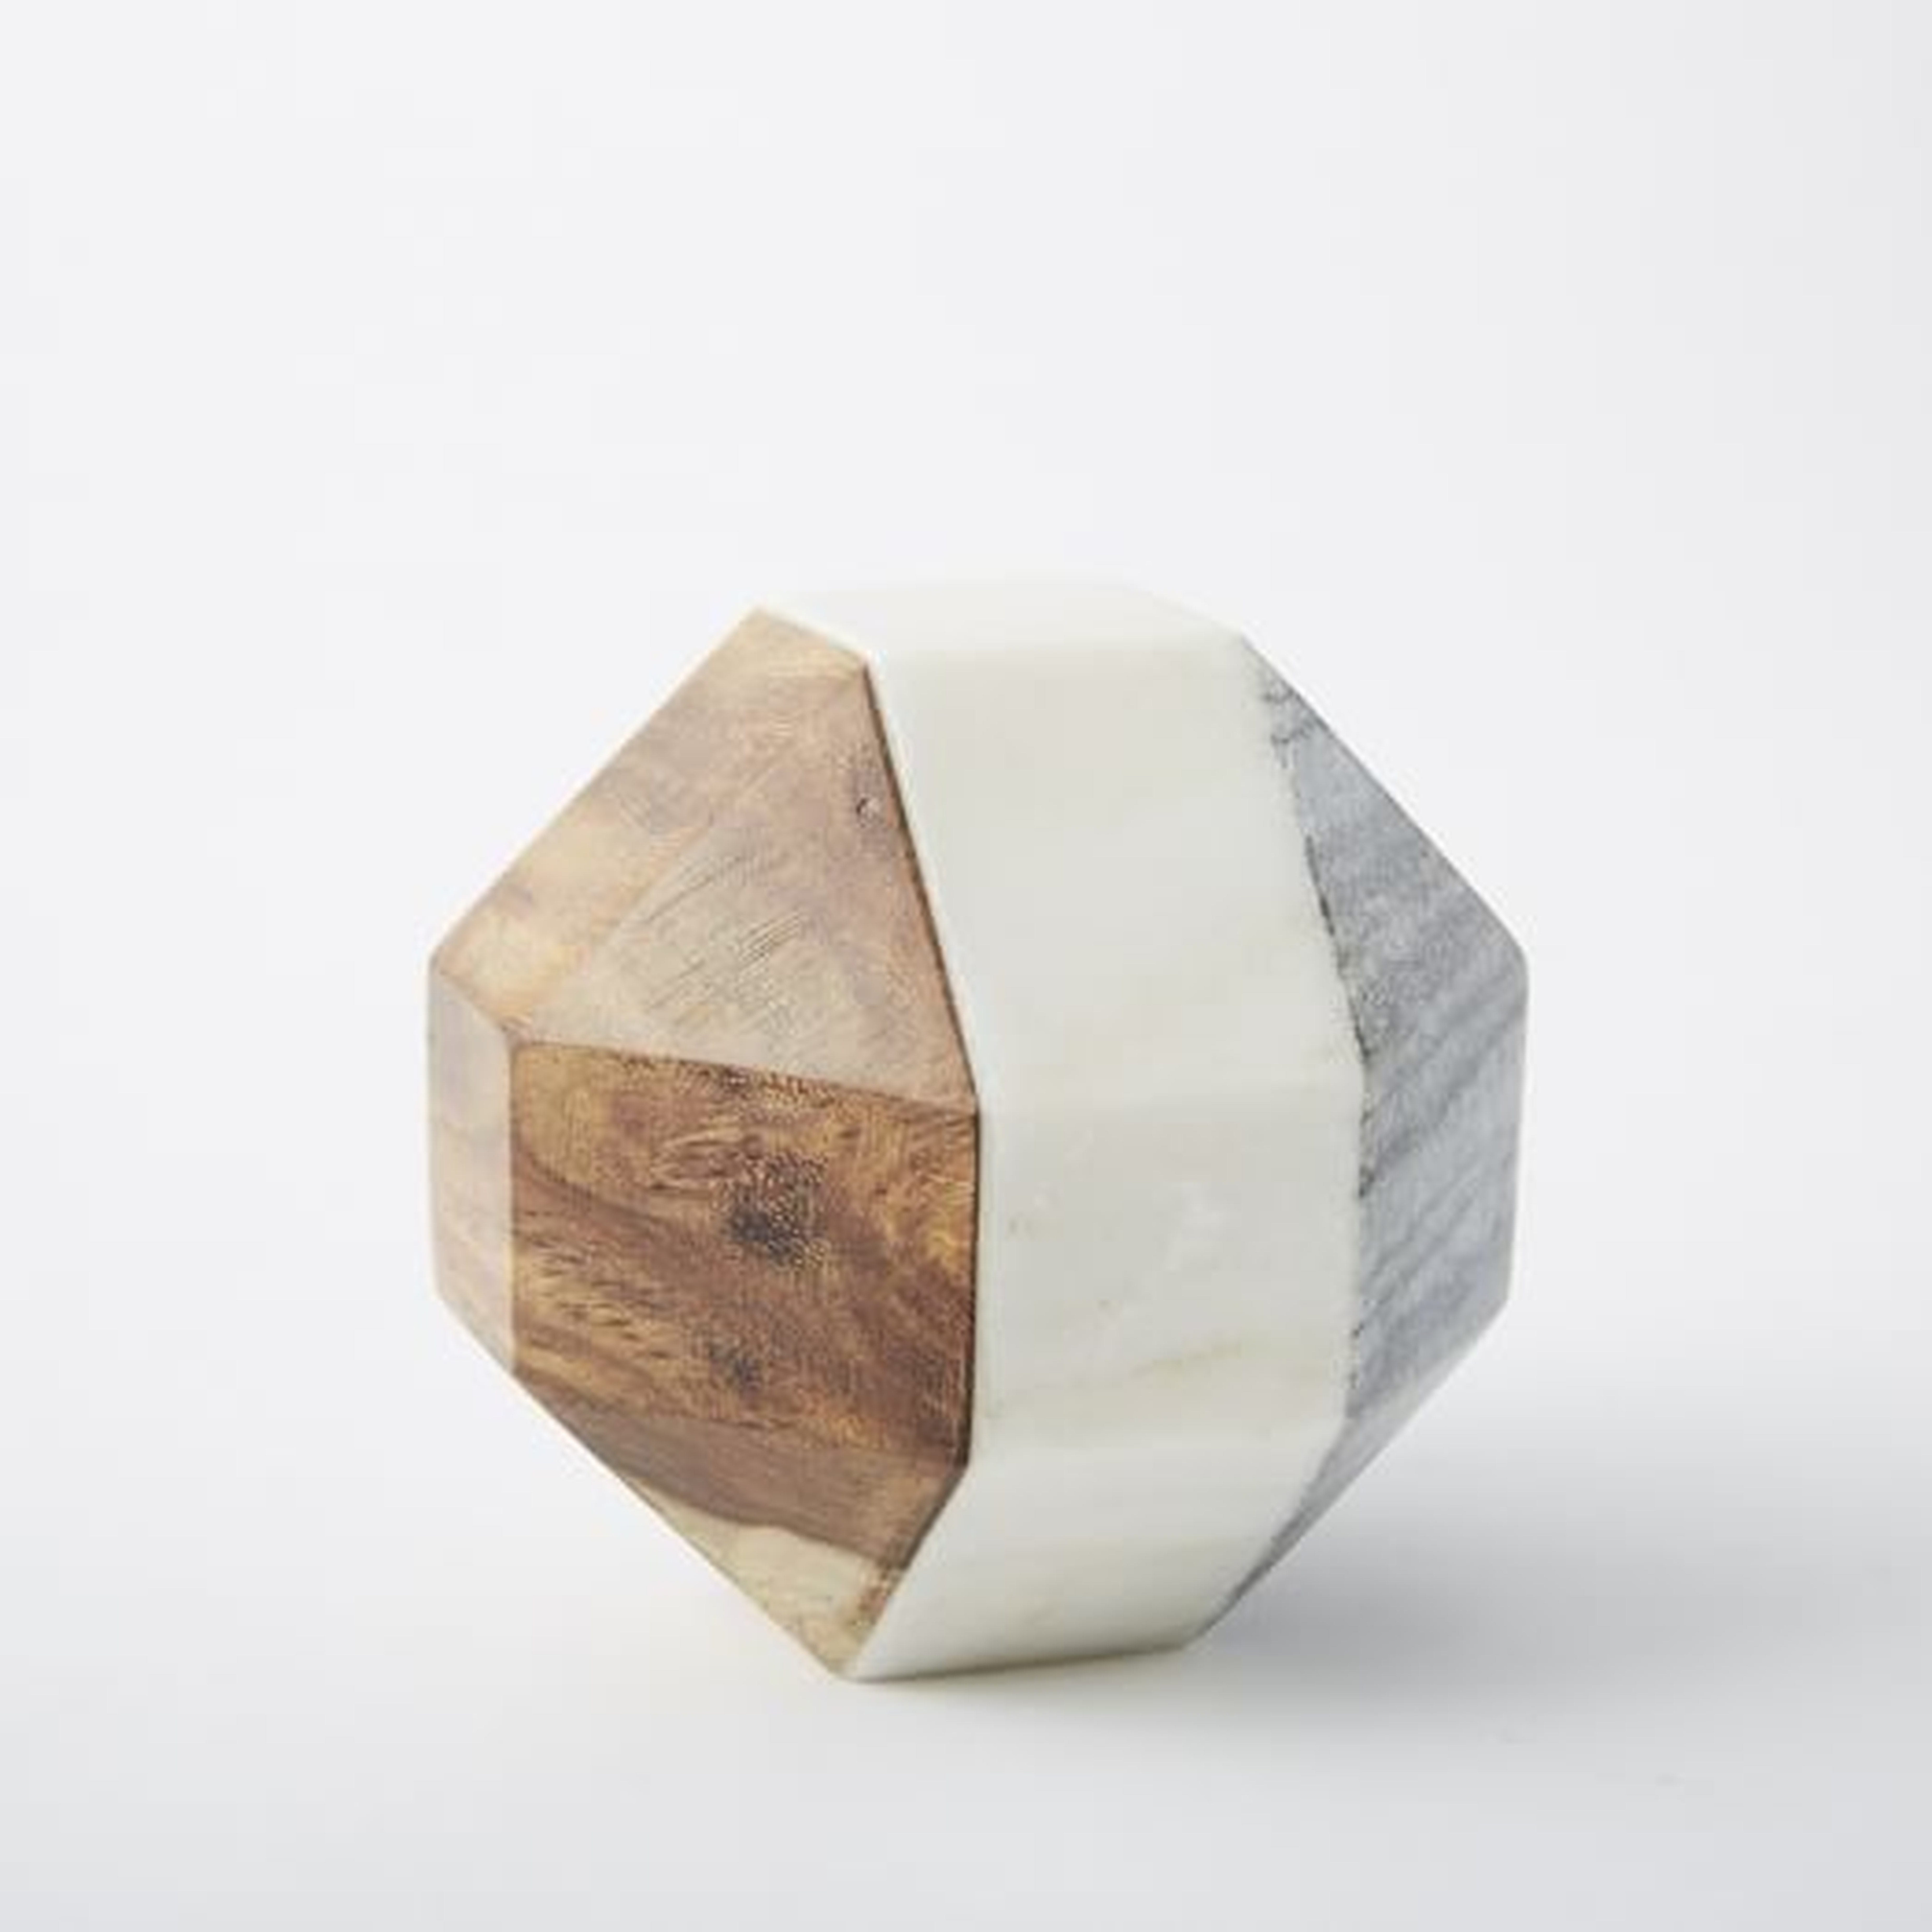 Marble + Wood Geometric Objects - Polyhedron - Small - West Elm